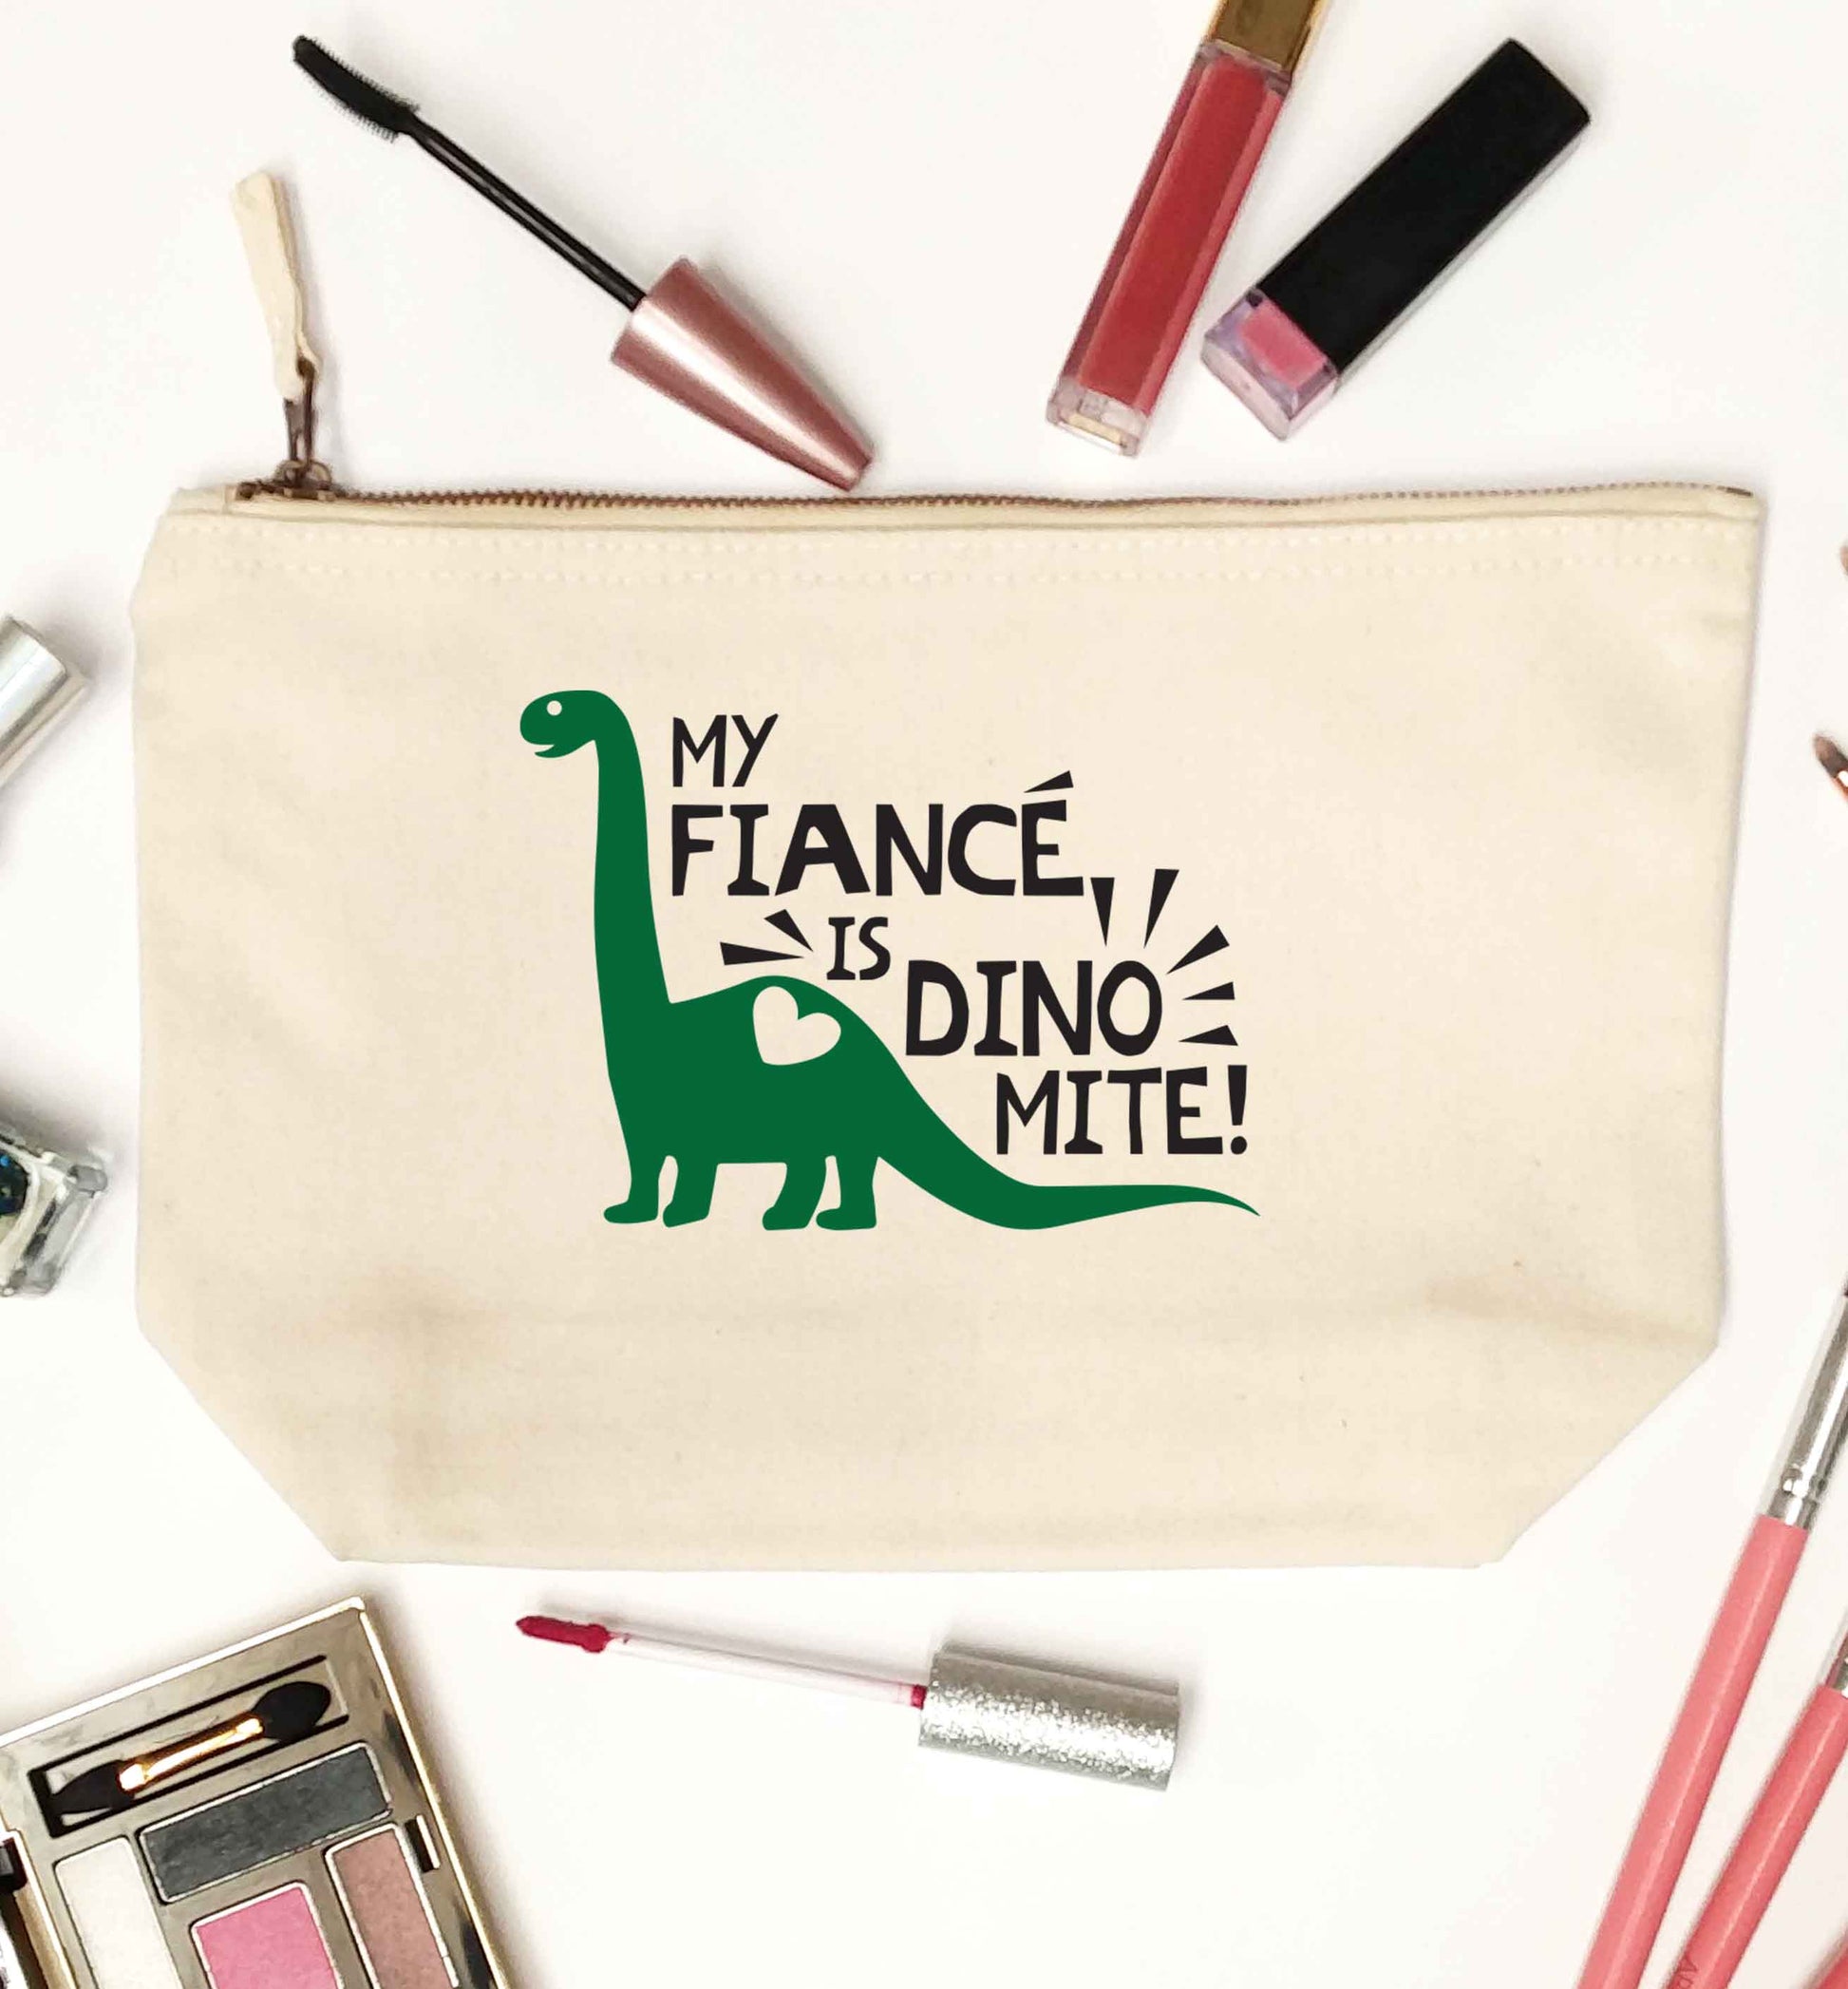 My fiance is dinomite! natural makeup bag